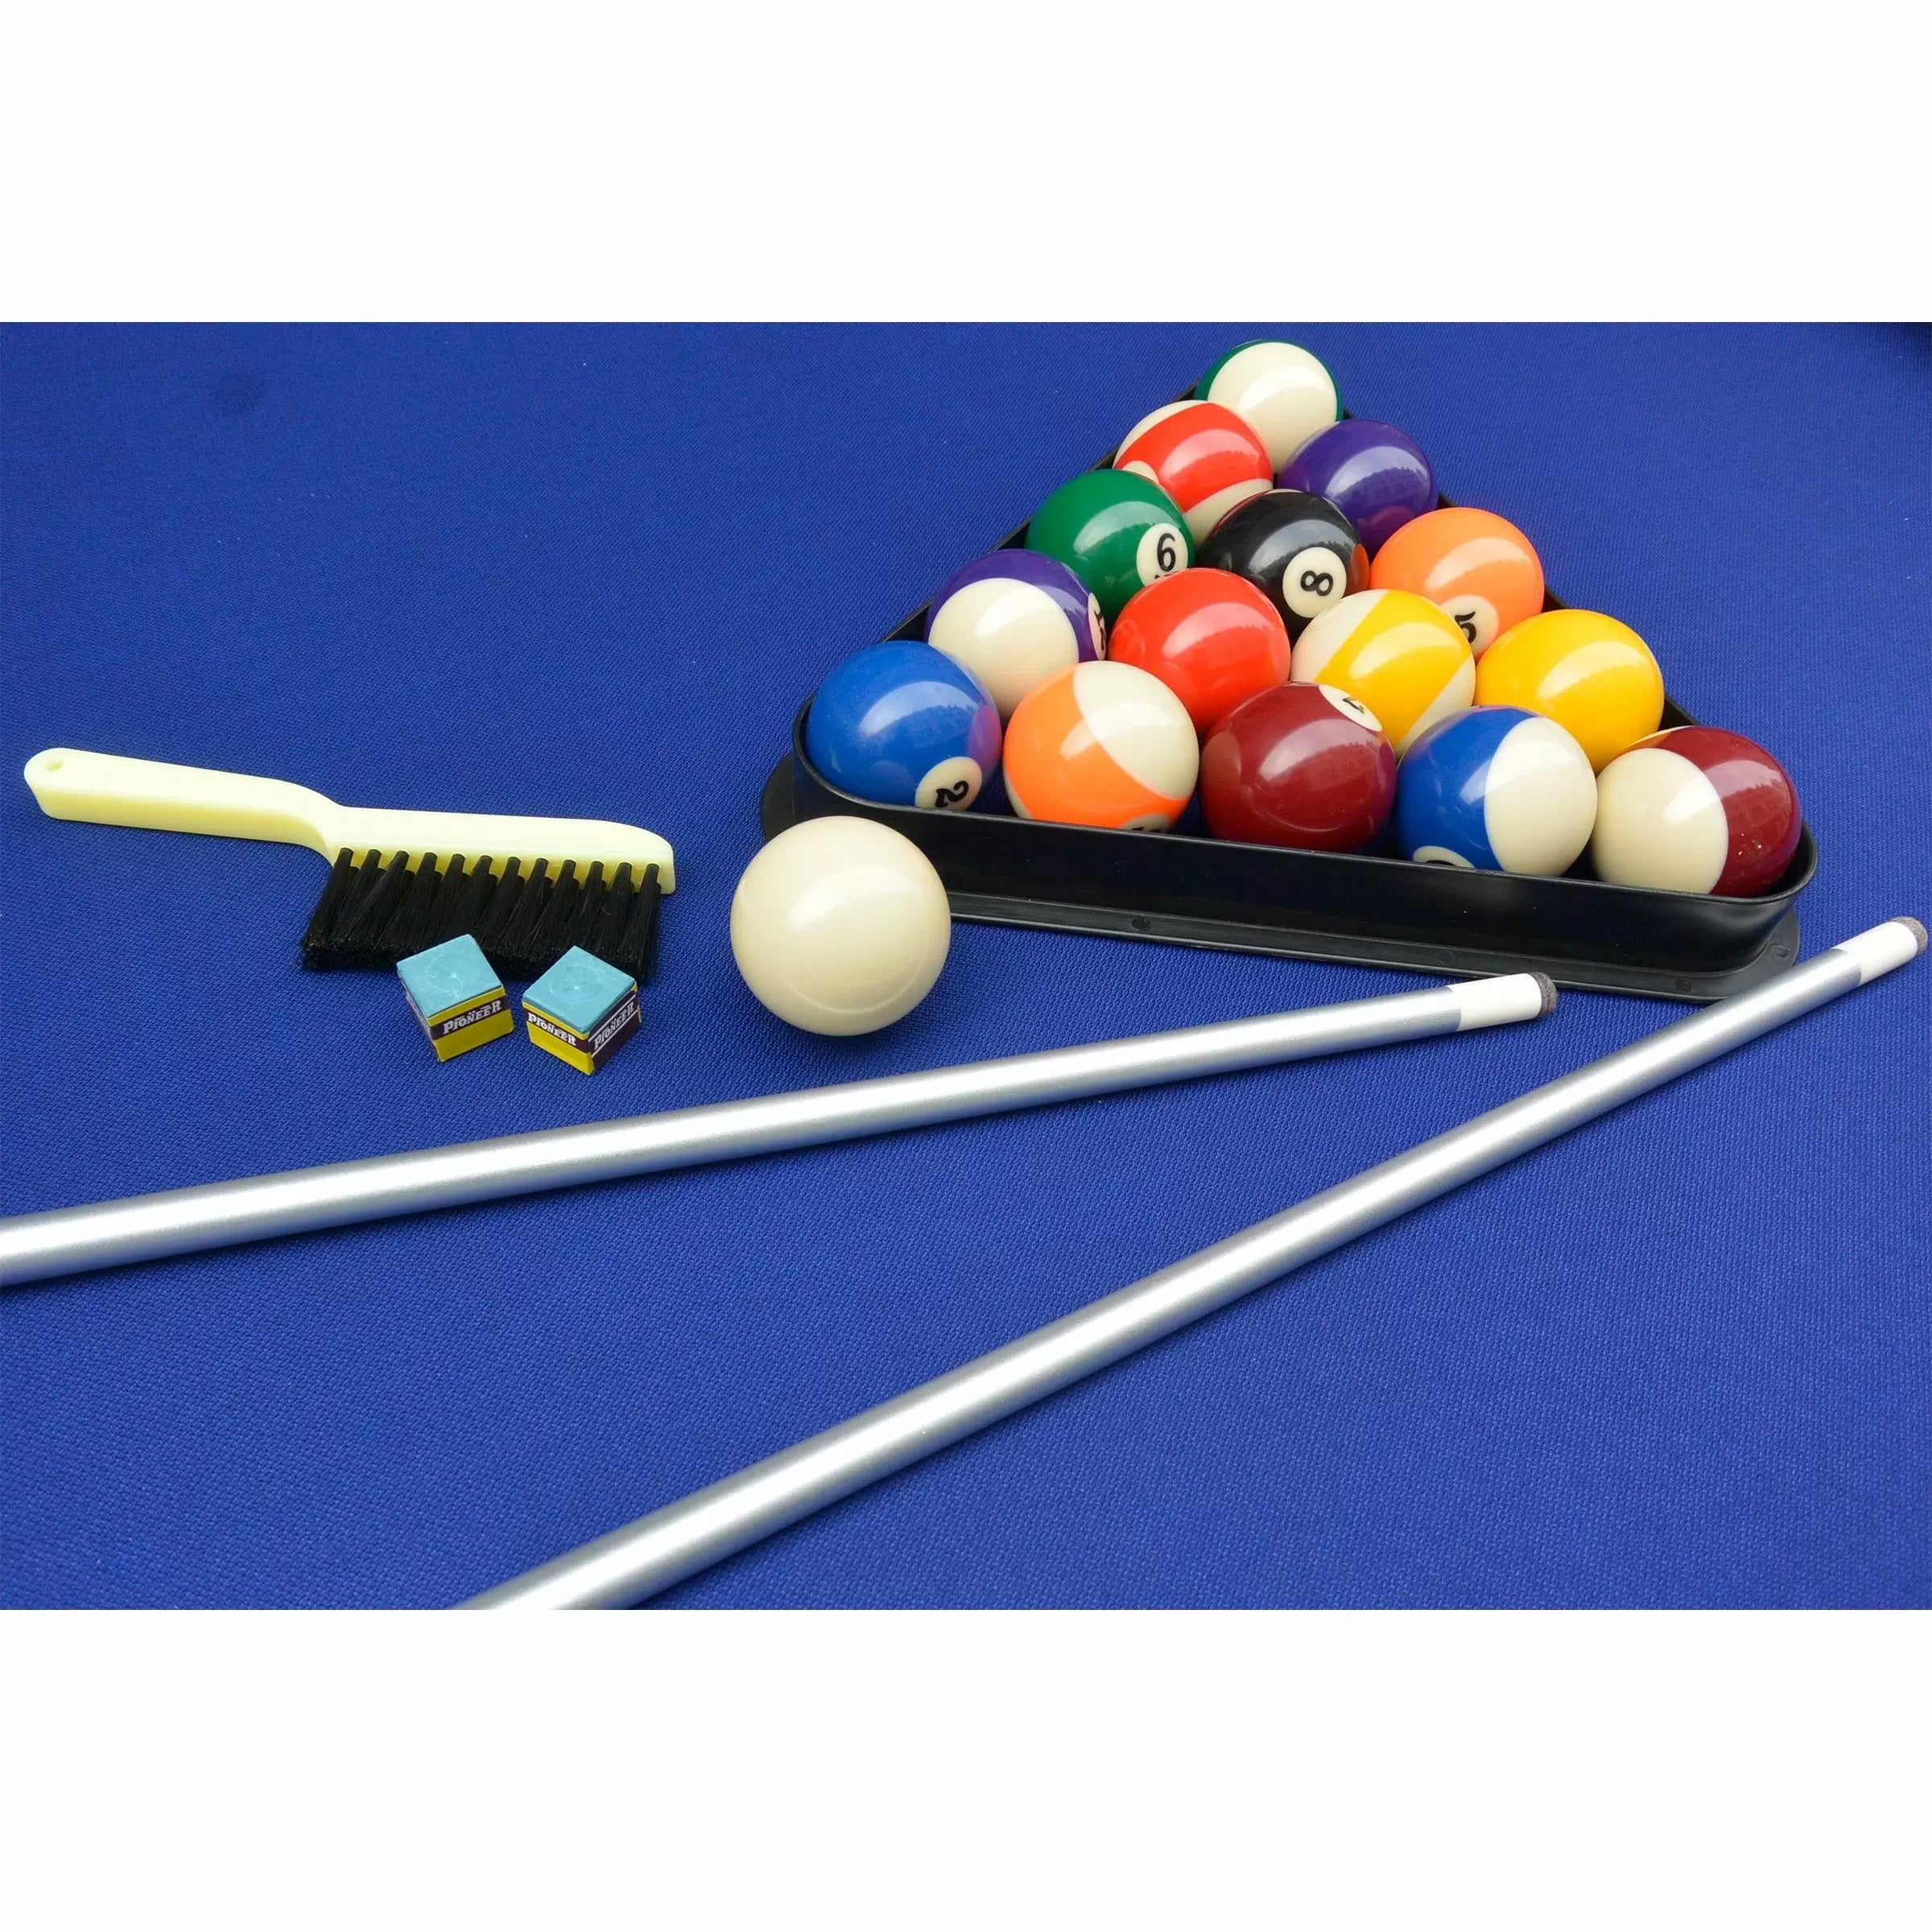 Imperial Esterno Outdoor Pool Table ball cue and others